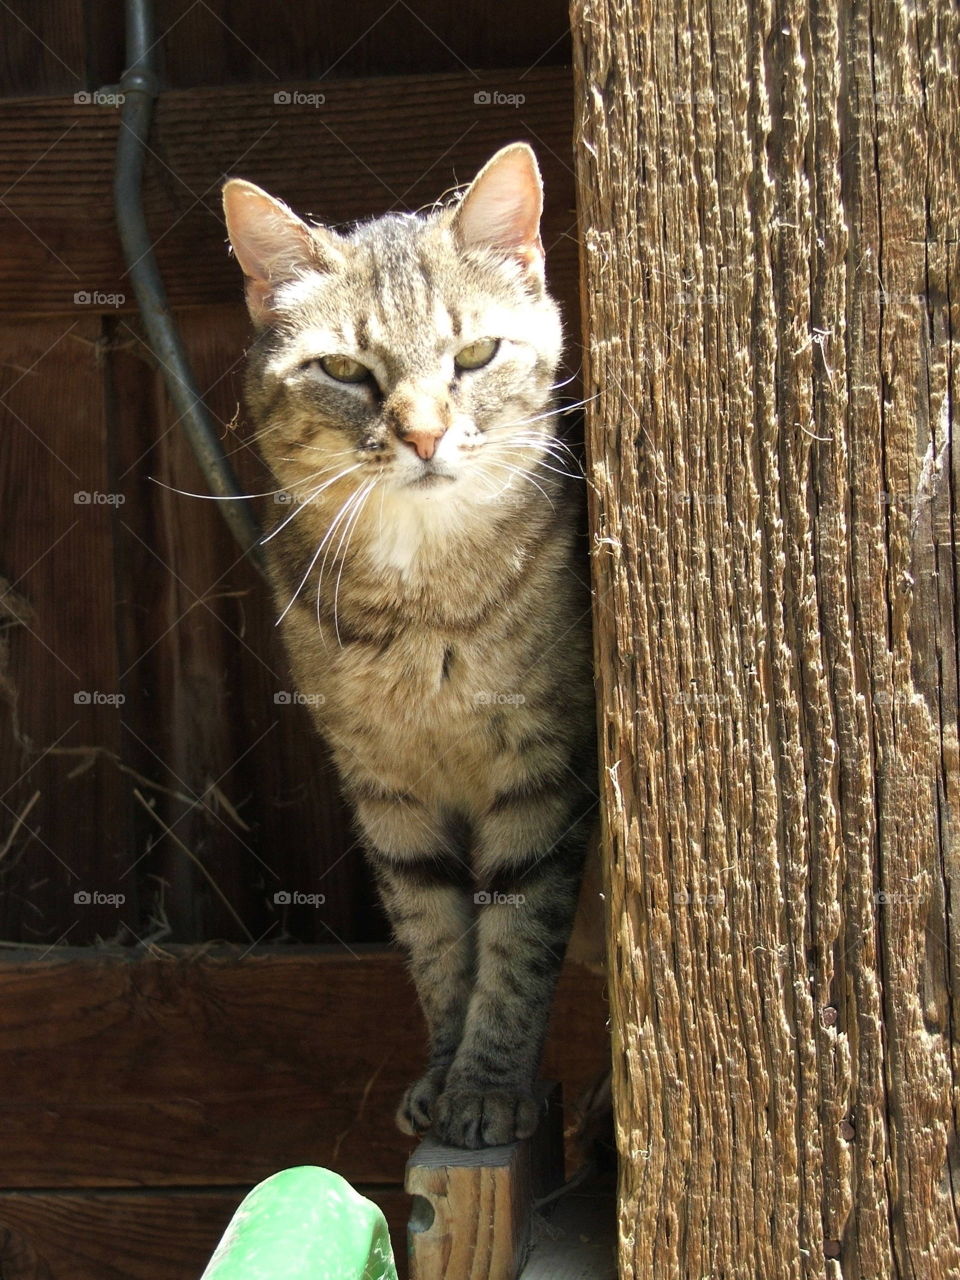 Cat in the Sun. A cat emerging from a barn into the Sun